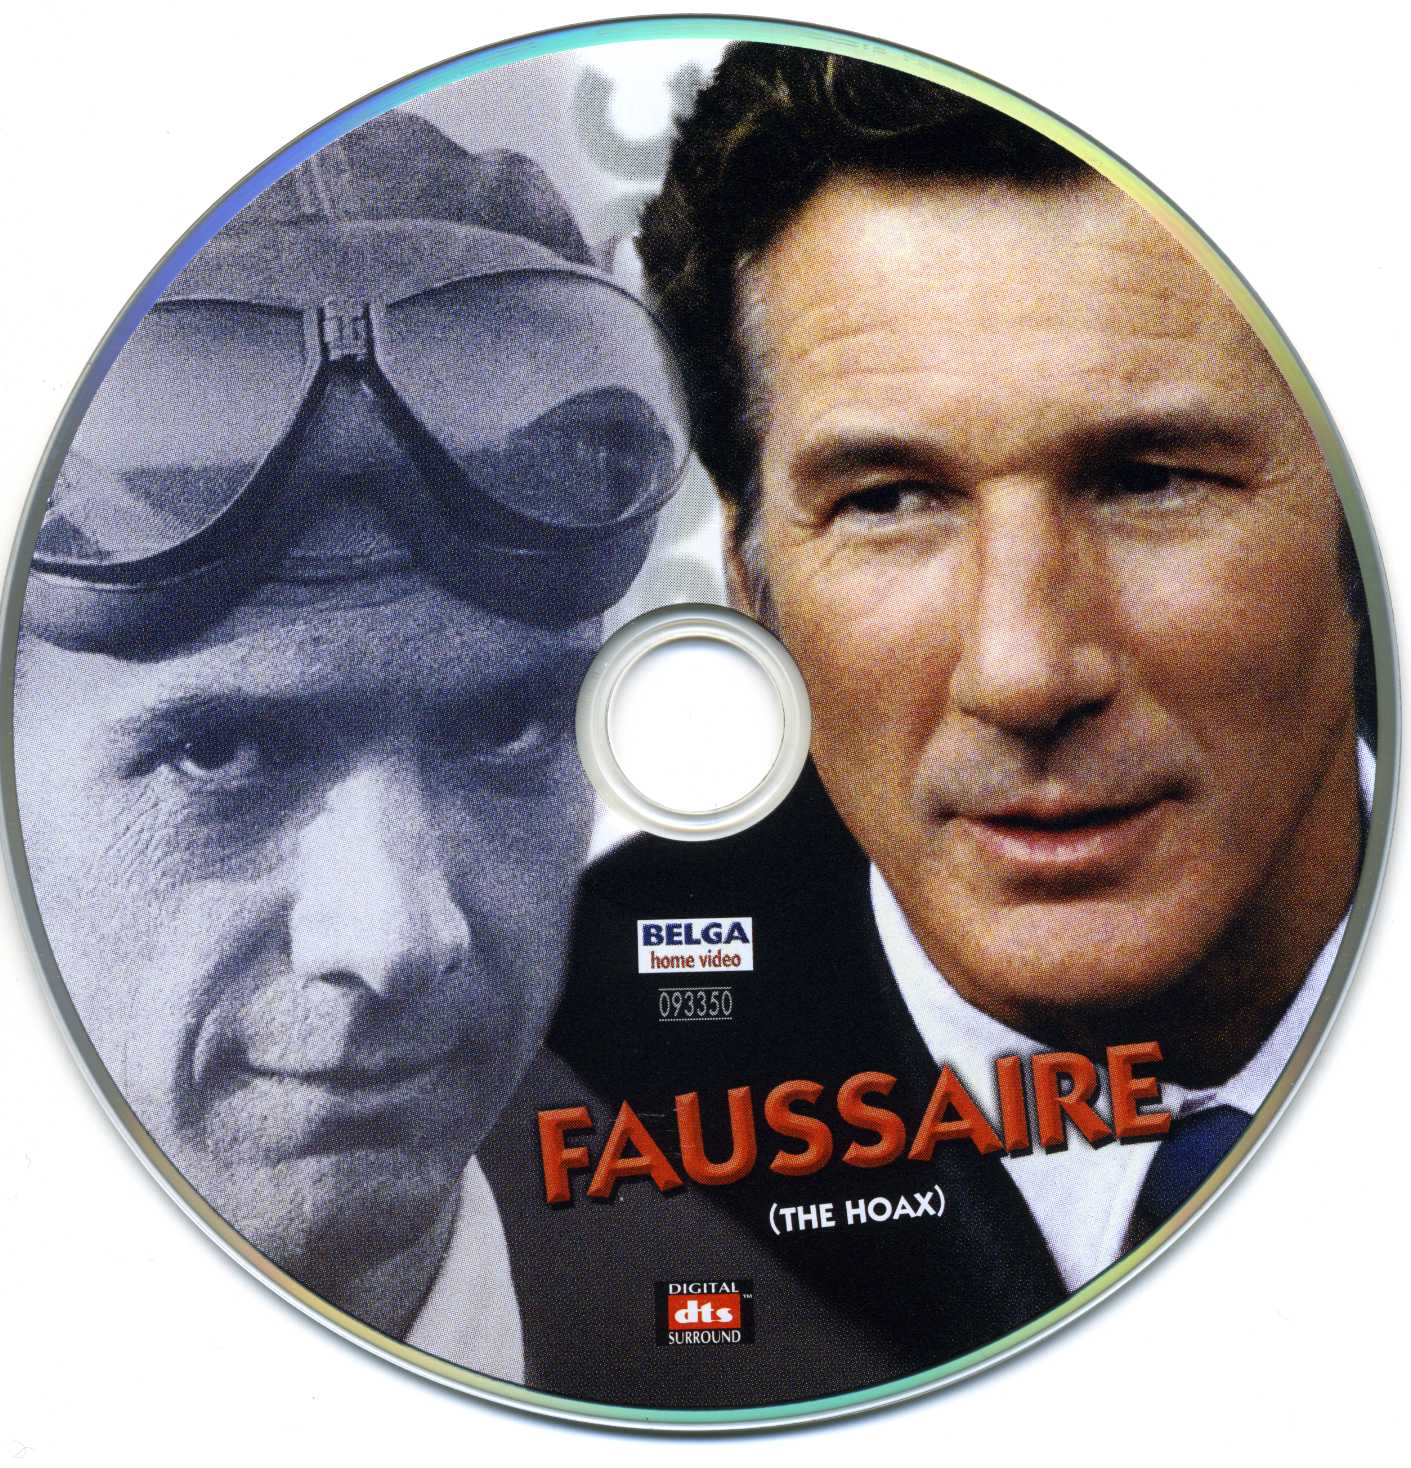 Faussaire v2